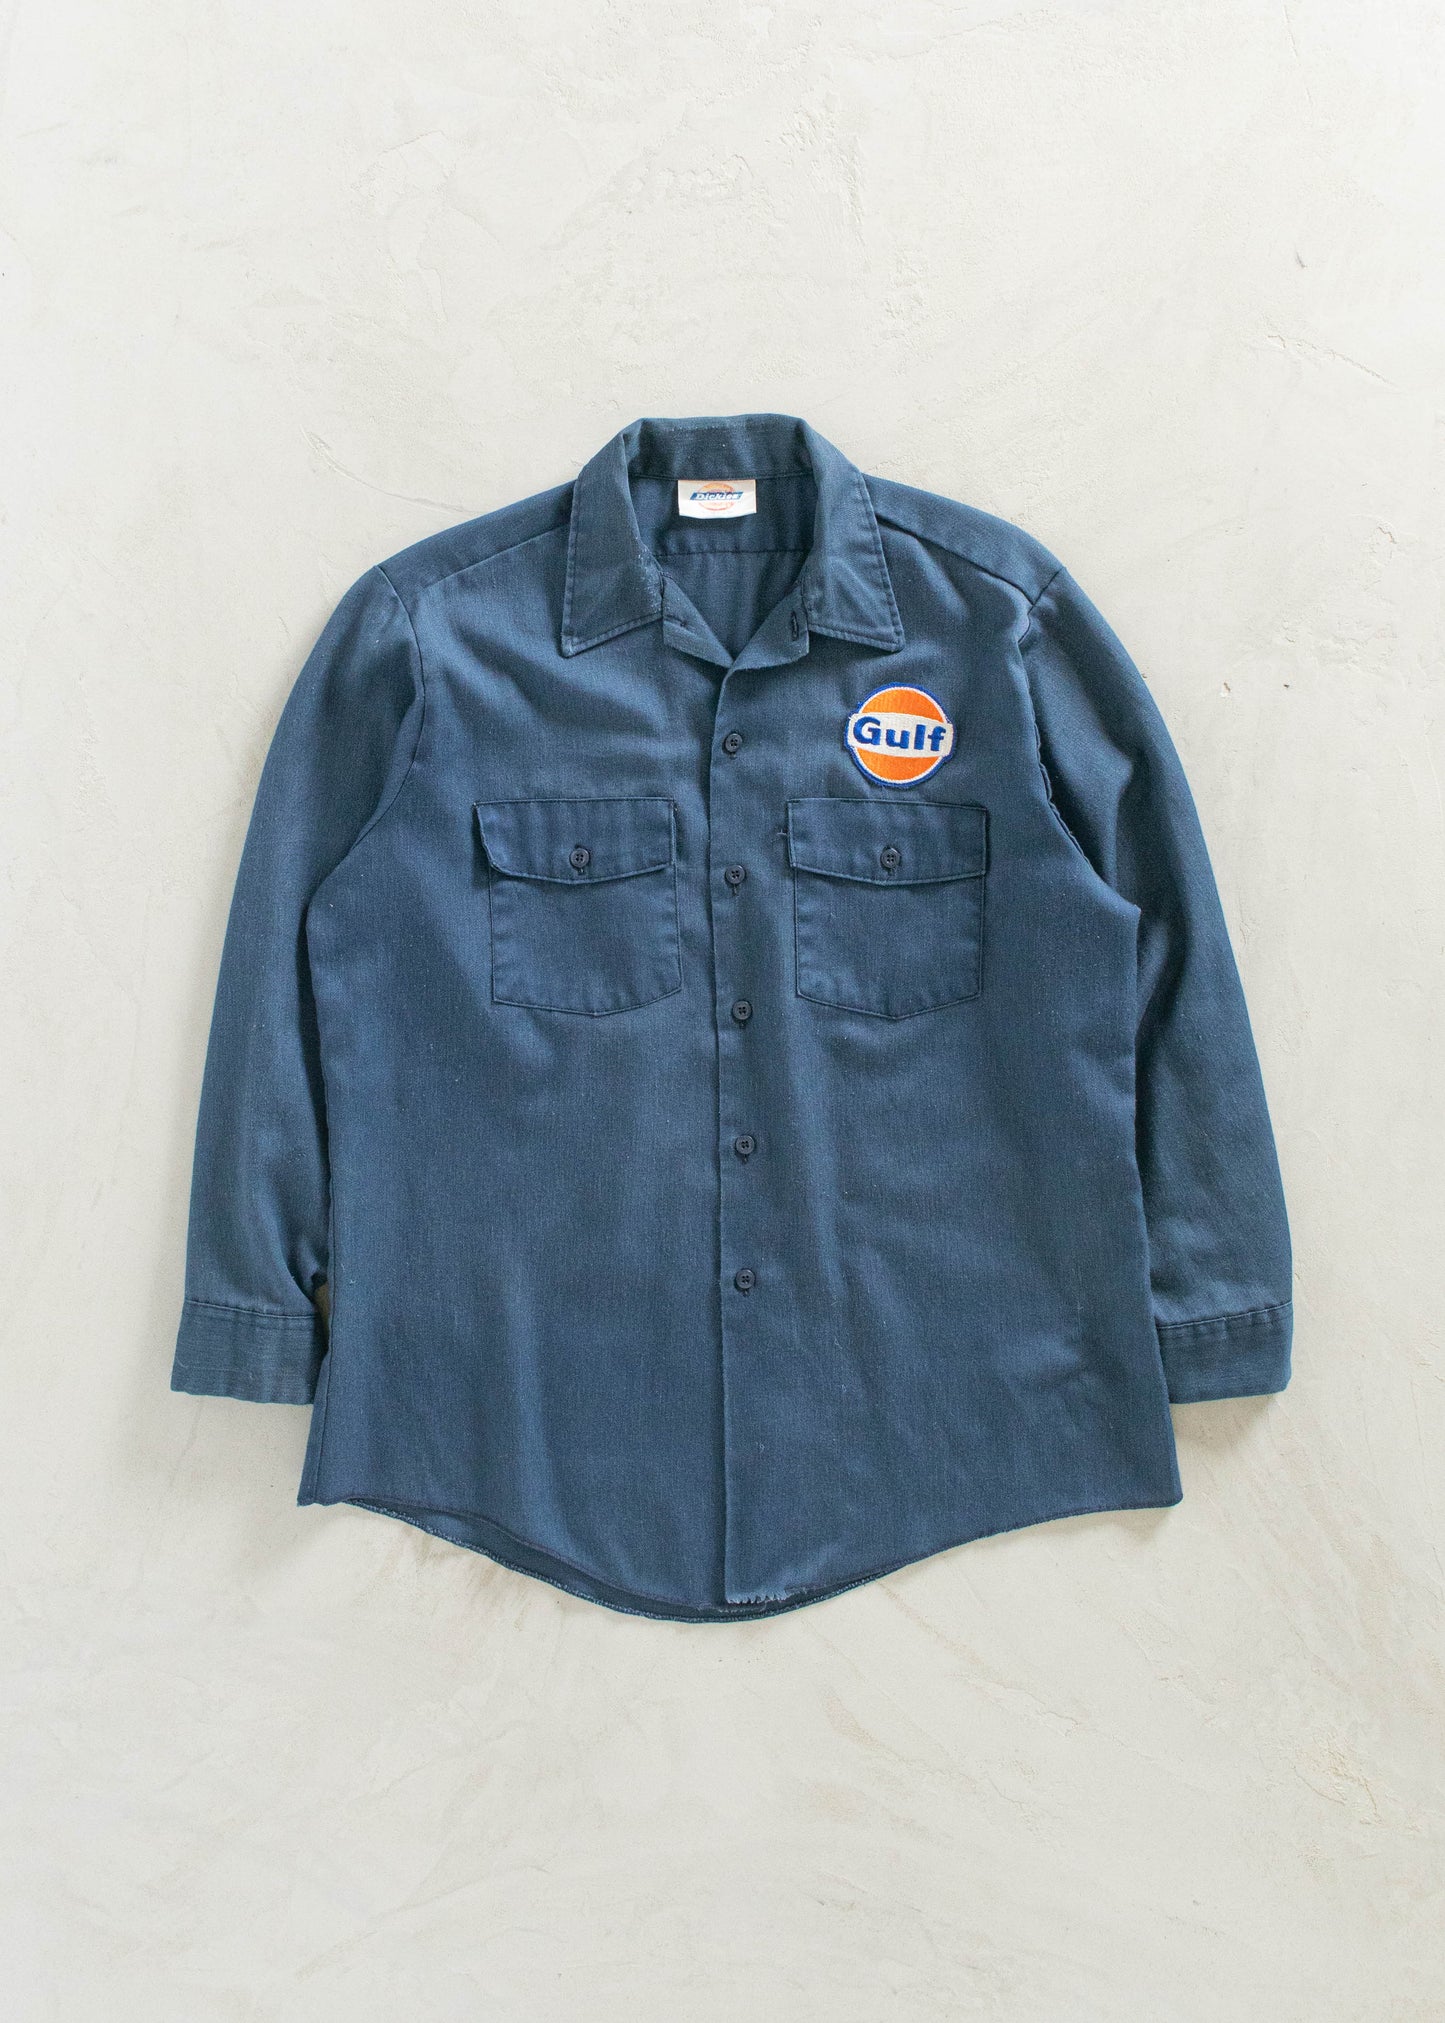 Dickies Workwear Button Up Shirt Size S/M